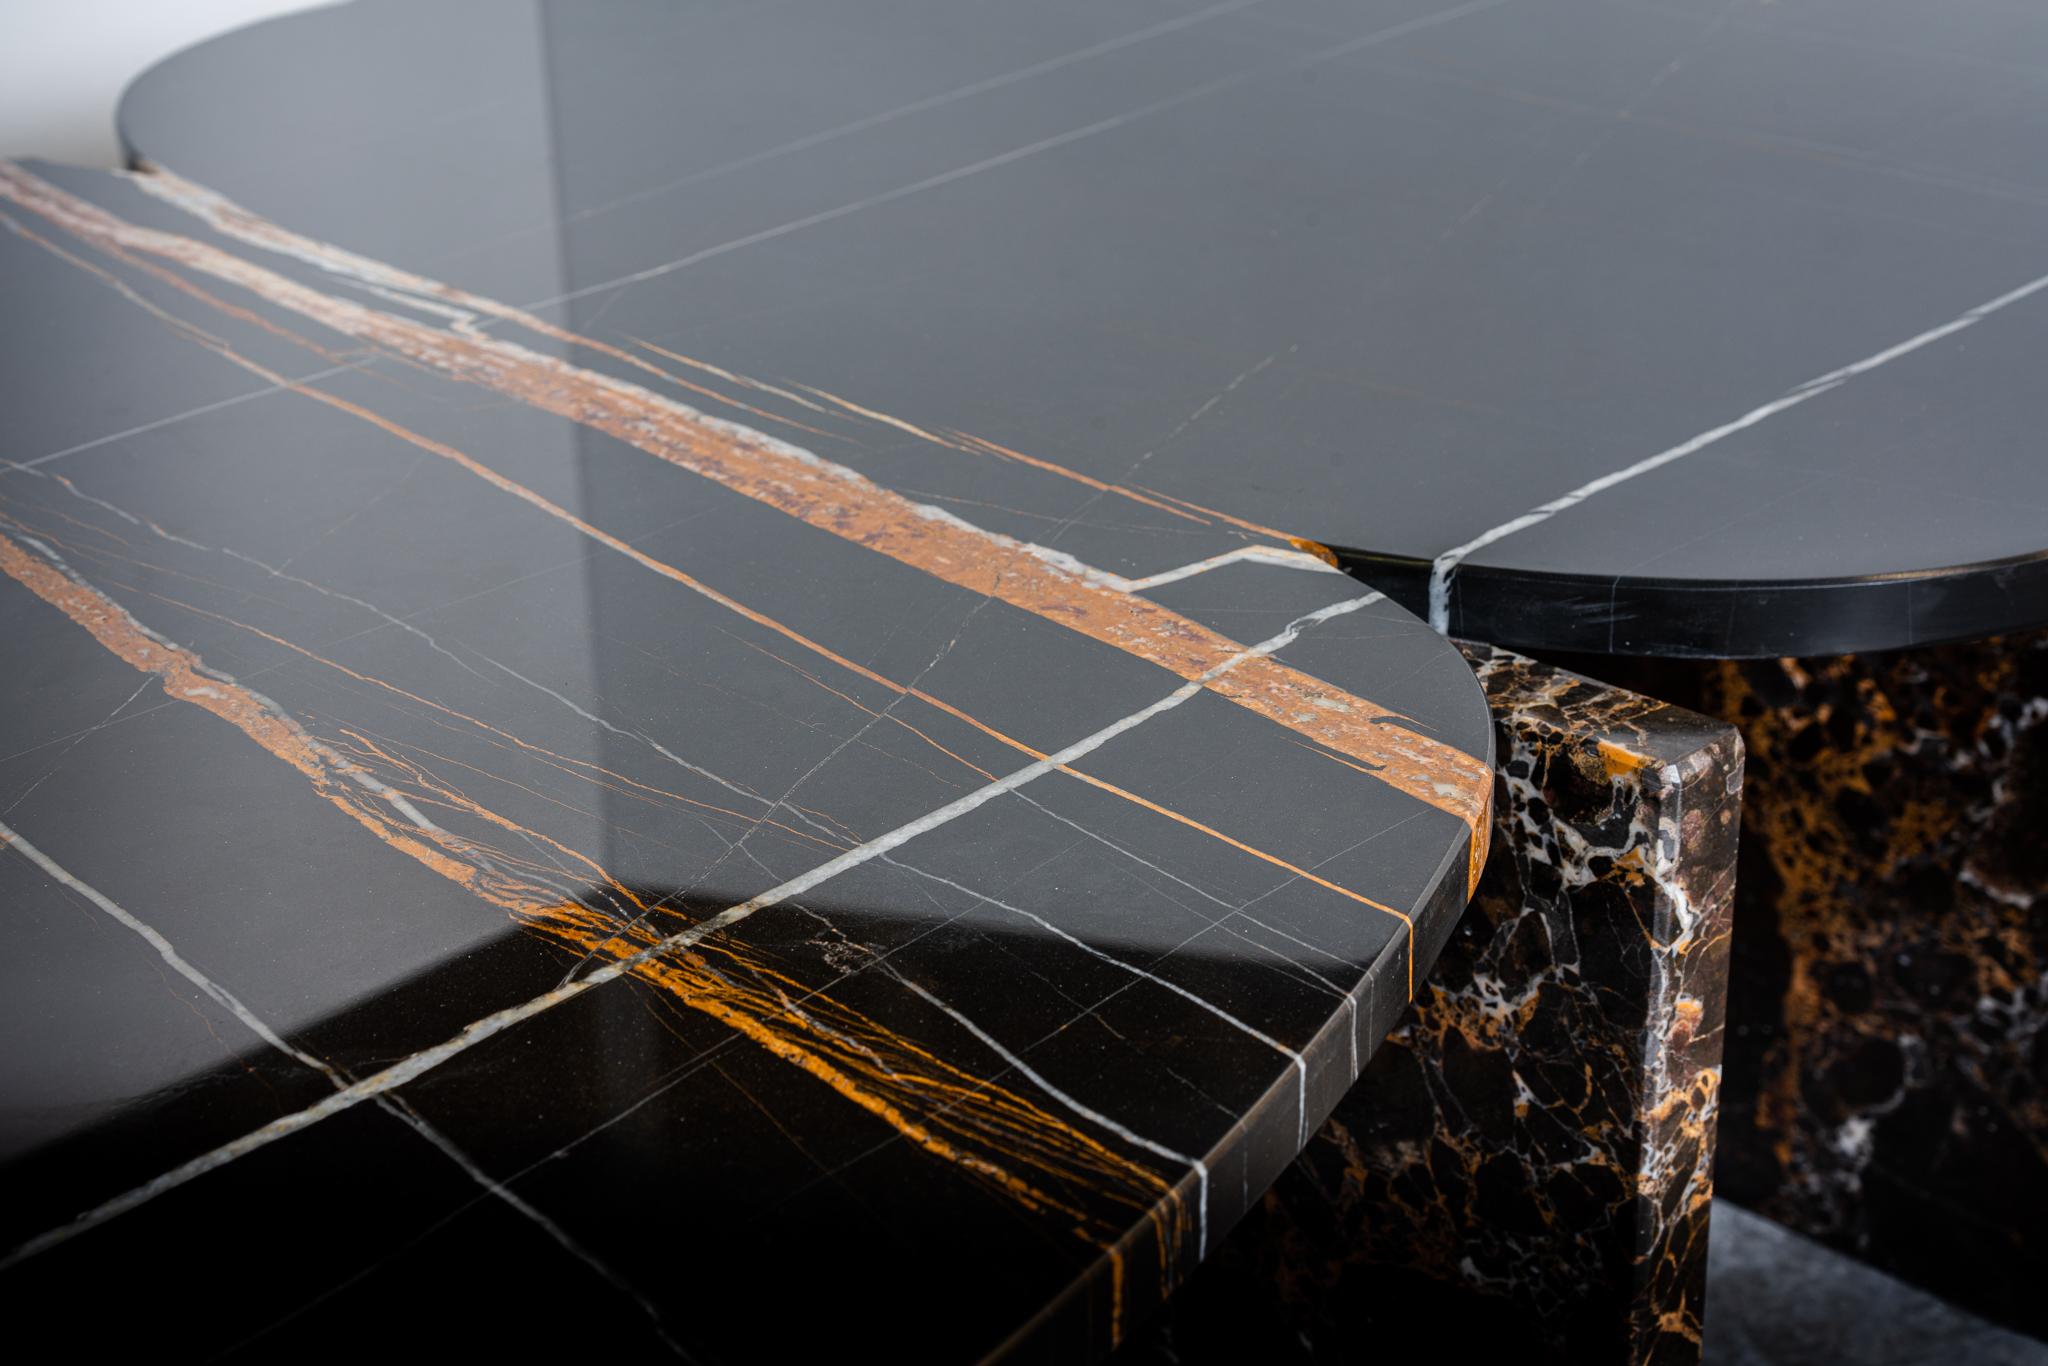 Unique trilithon marble coffee table - by OS And OOS
Dimensions: 200 x 110 x 37 cm
Materials: Sahara Noir (organic shapes) and Emperador gold (rectangular shapes)
Other marbles or dimensions table could be made to order.
2020

Studio OS ? OOS